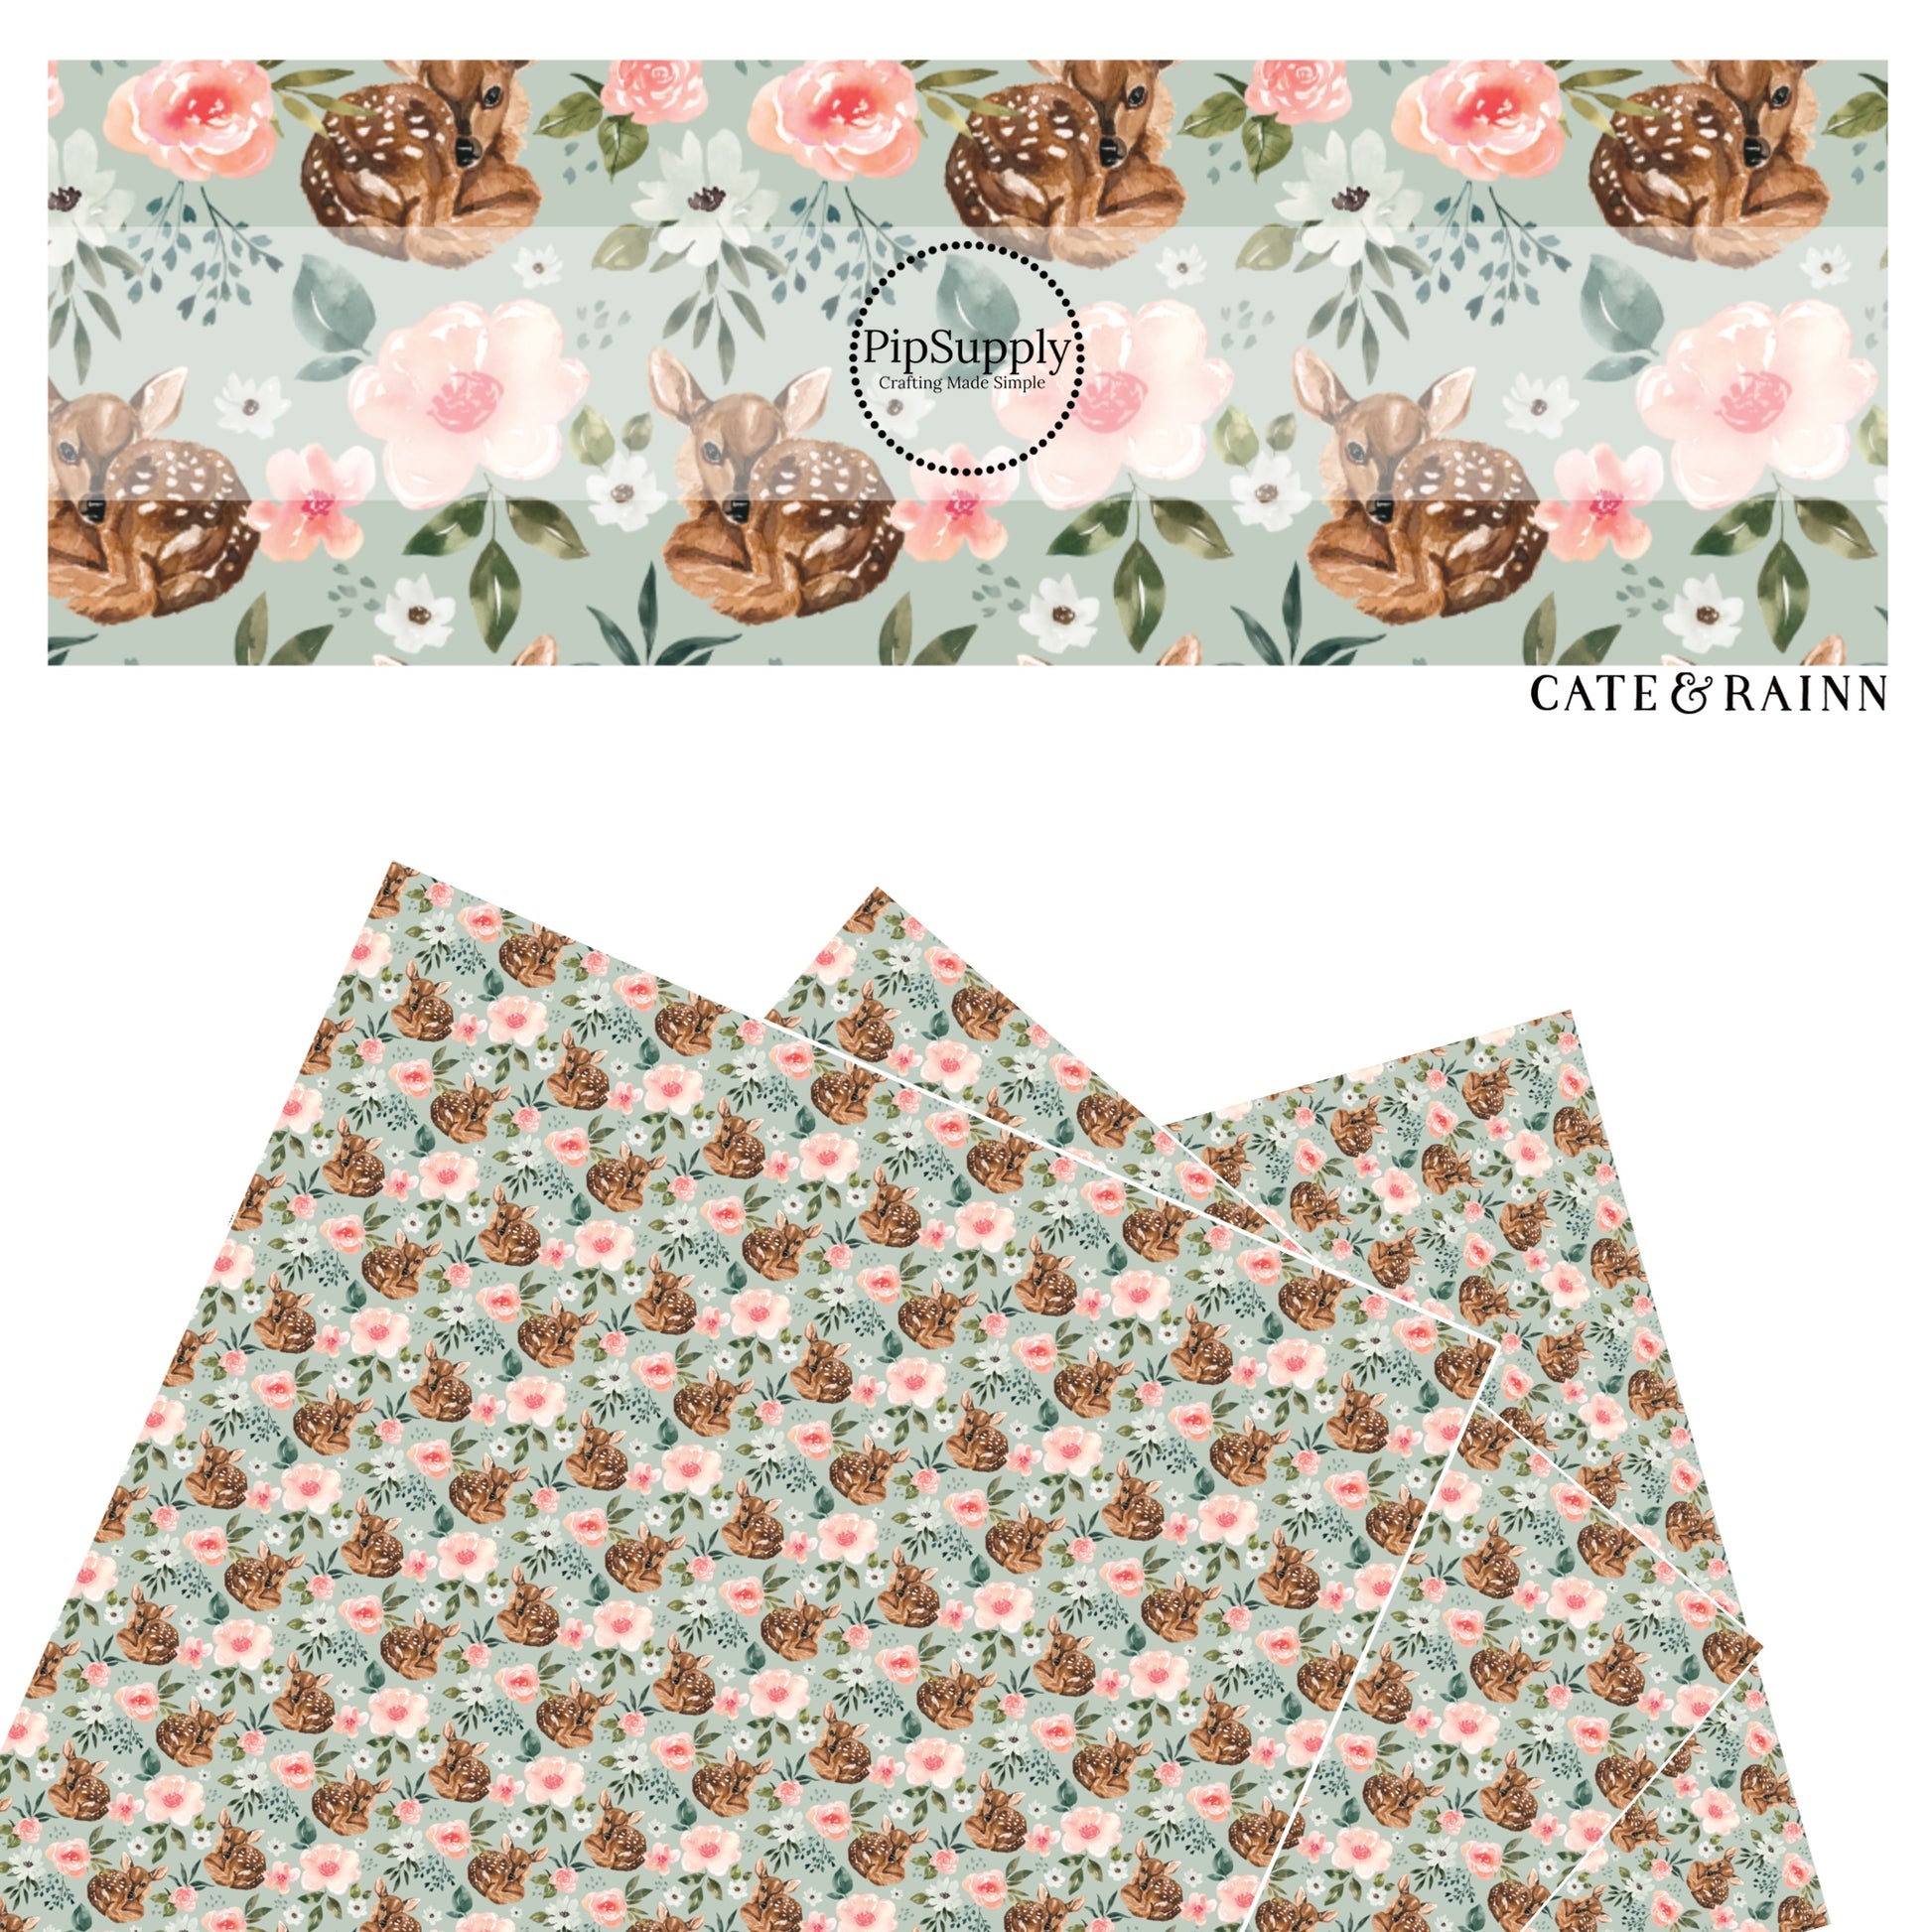 These spring floral pattern themed faux leather sheets contain the following design elements: baby fawns surrounded by pink and white flowers. Our CPSIA compliant faux leather sheets or rolls can be used for all types of crafting projects.